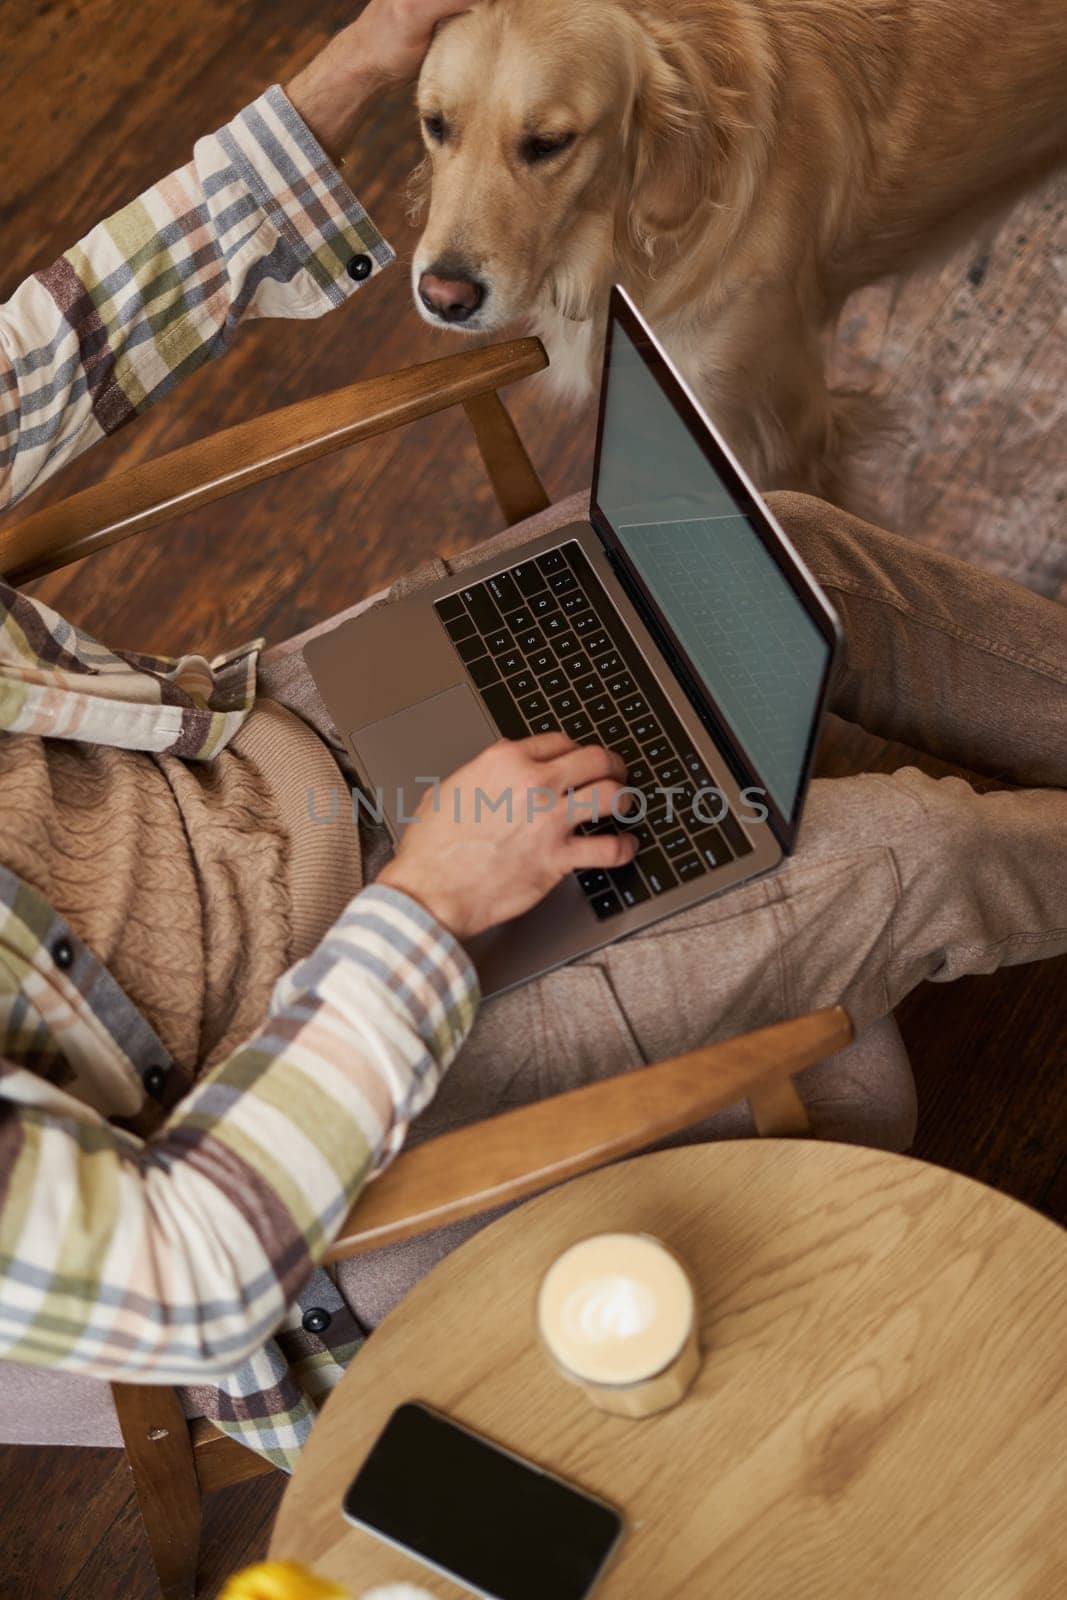 Vertical cropped photo of male hands and body, man petting the dog while working on laptop in cafe, drinking coffee.